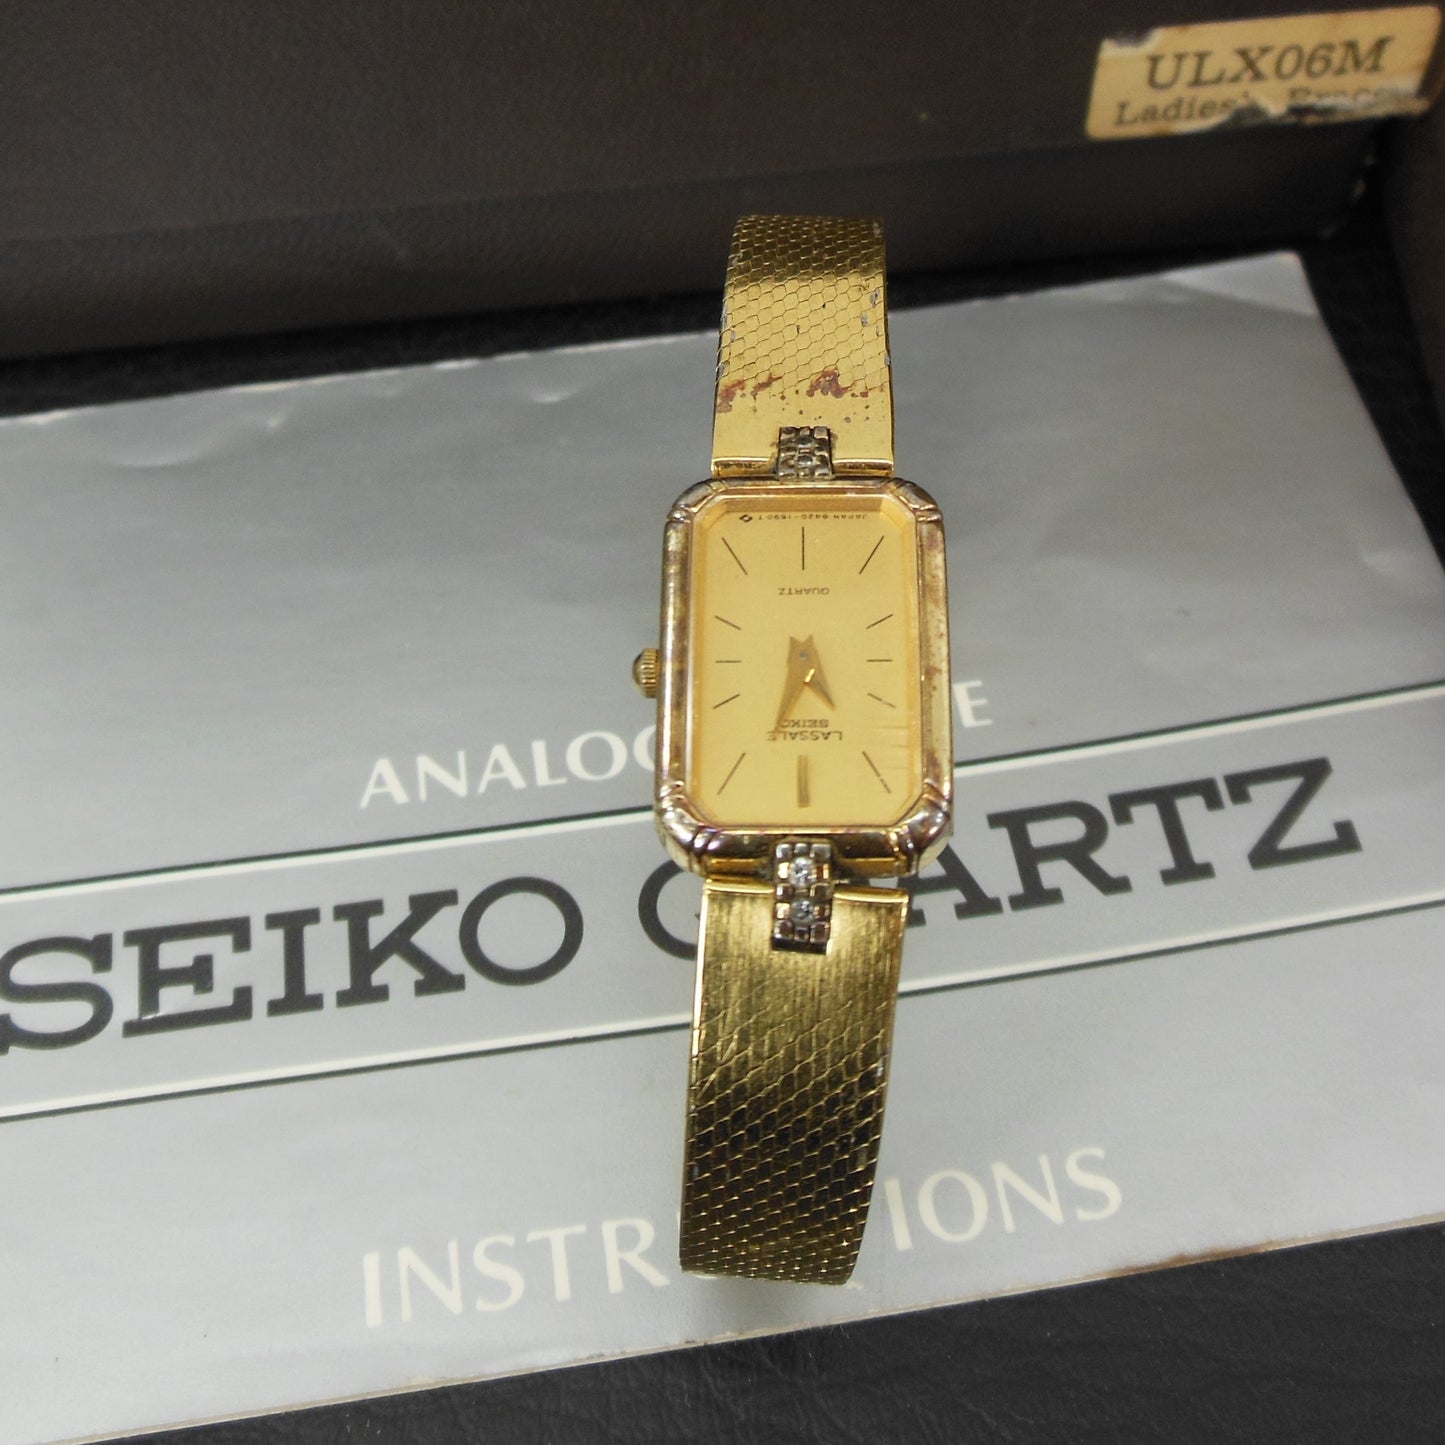 Seiko LaSalle 1980's Women's Gold Filled Diamond Watch Boxed - Parts Repair Used